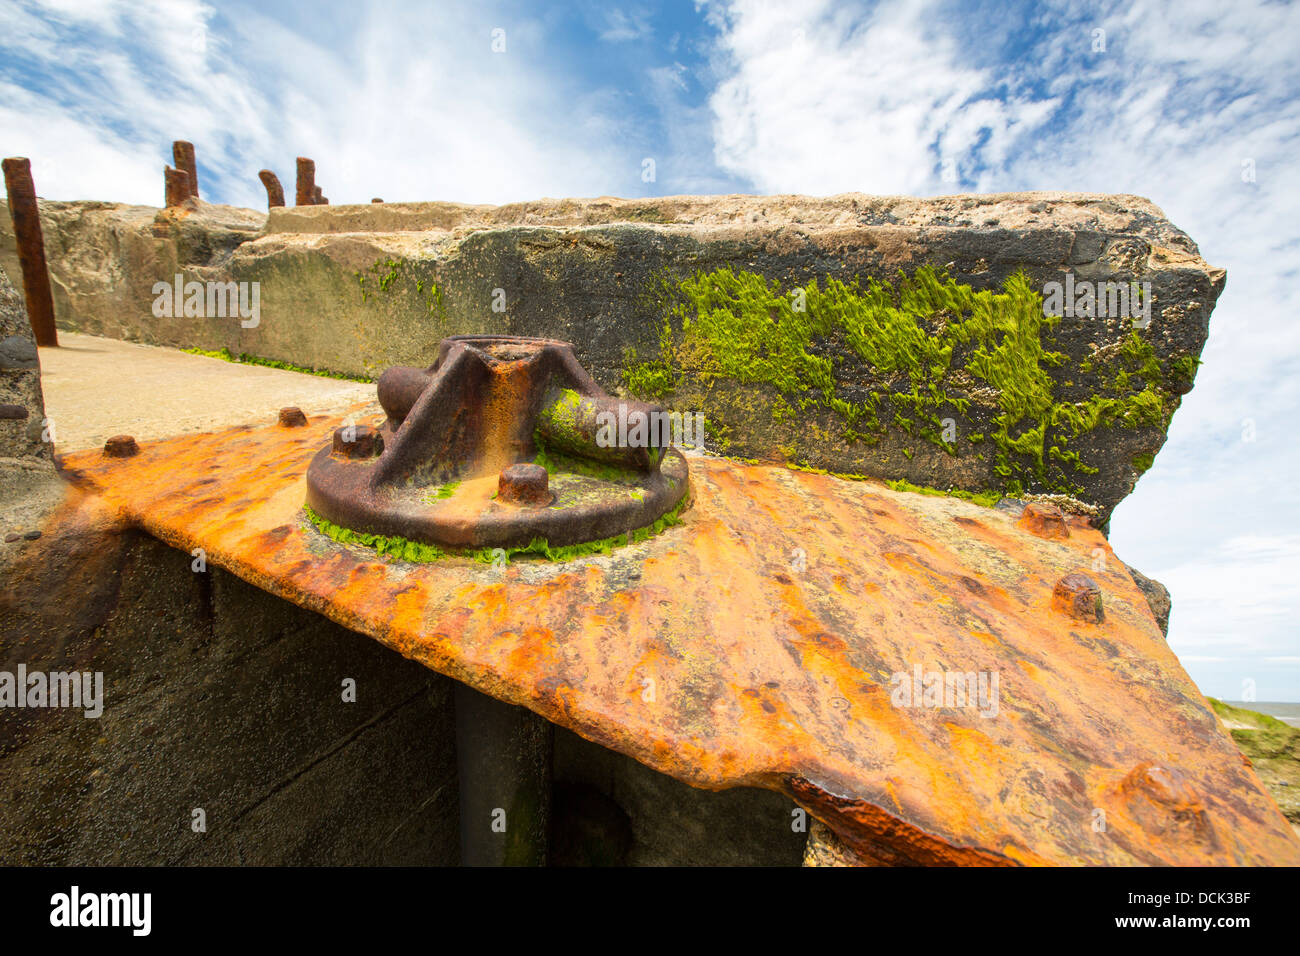 The Remains of a gun emplacement at the Godwin battery on the beach at Kilnsea Stock Photo